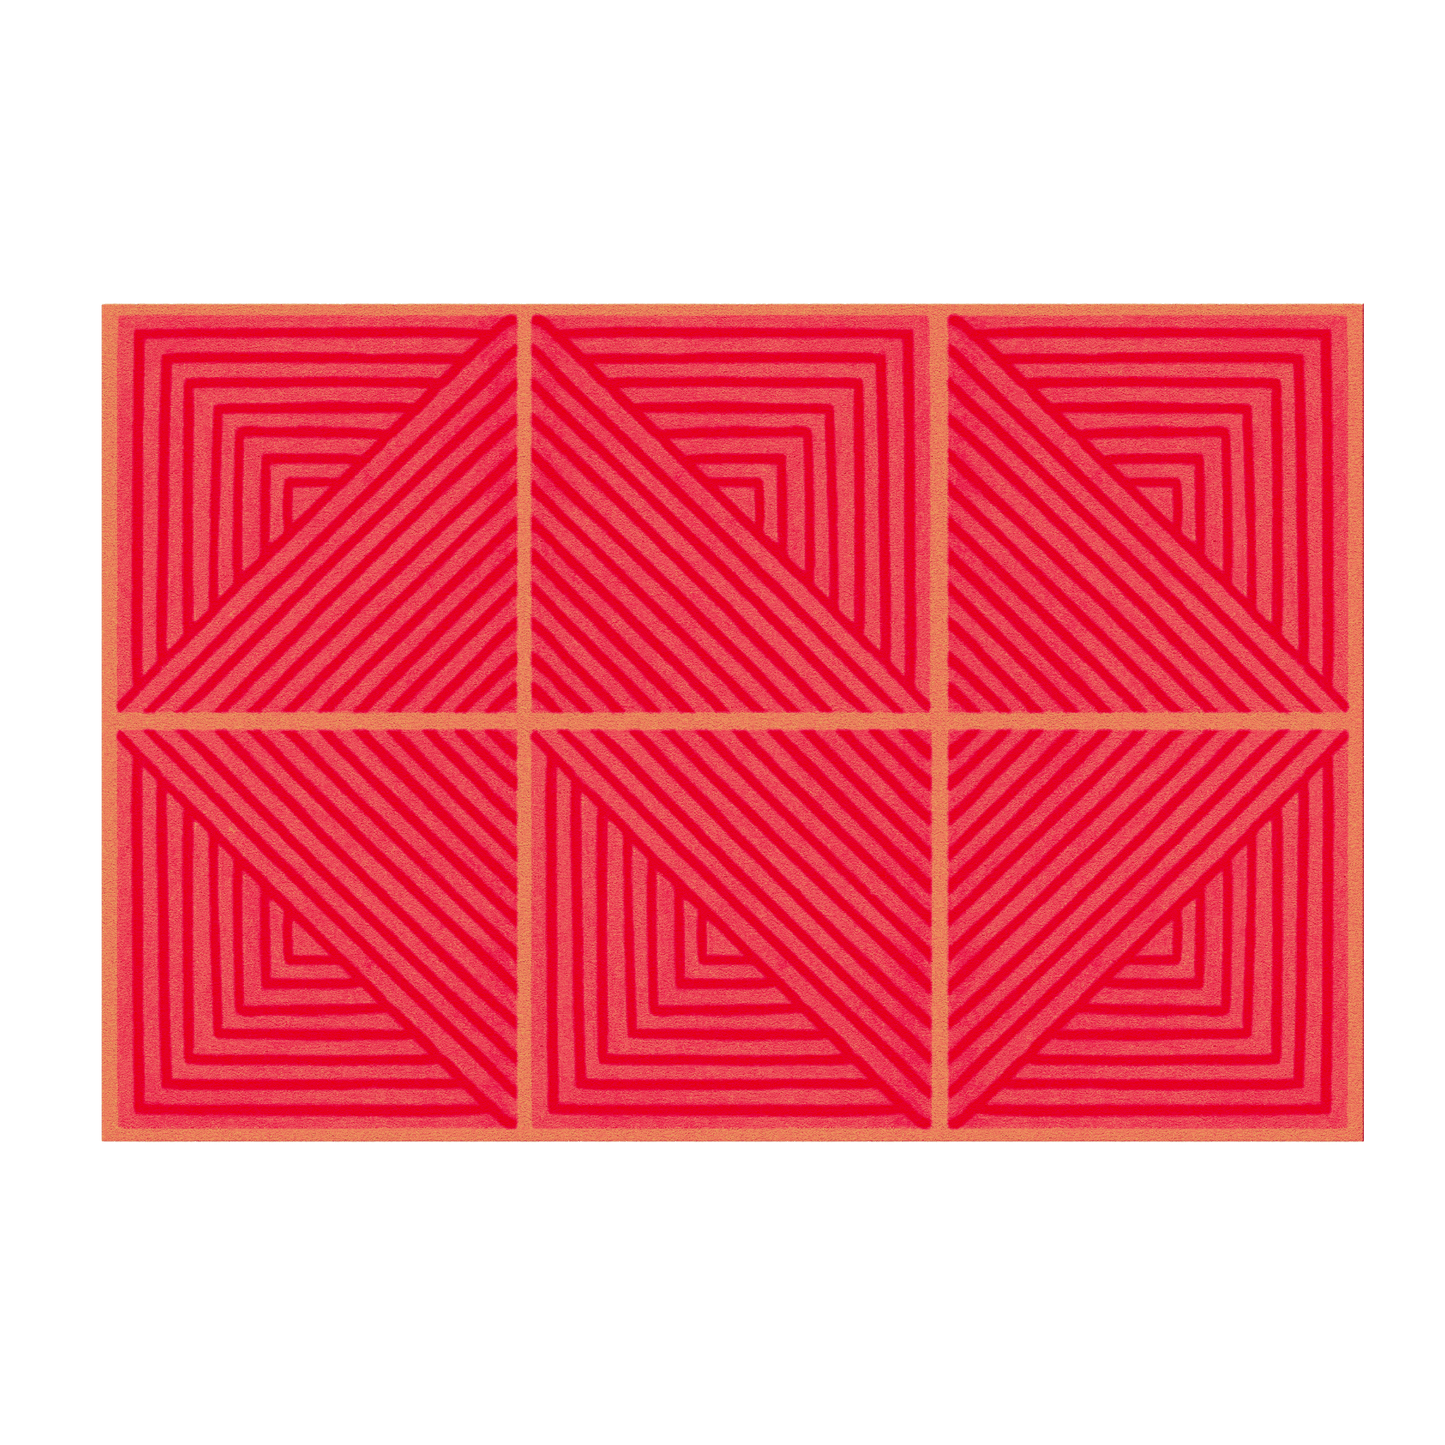 This is a modern-style rug that features a vibrant red color and a geometric pattern. Crafted through the hand-tufting technique, it offers durability and a soft texture. Made from wool, the rug is resistant to stains and adds a touch of luxury to contemporary home decor.